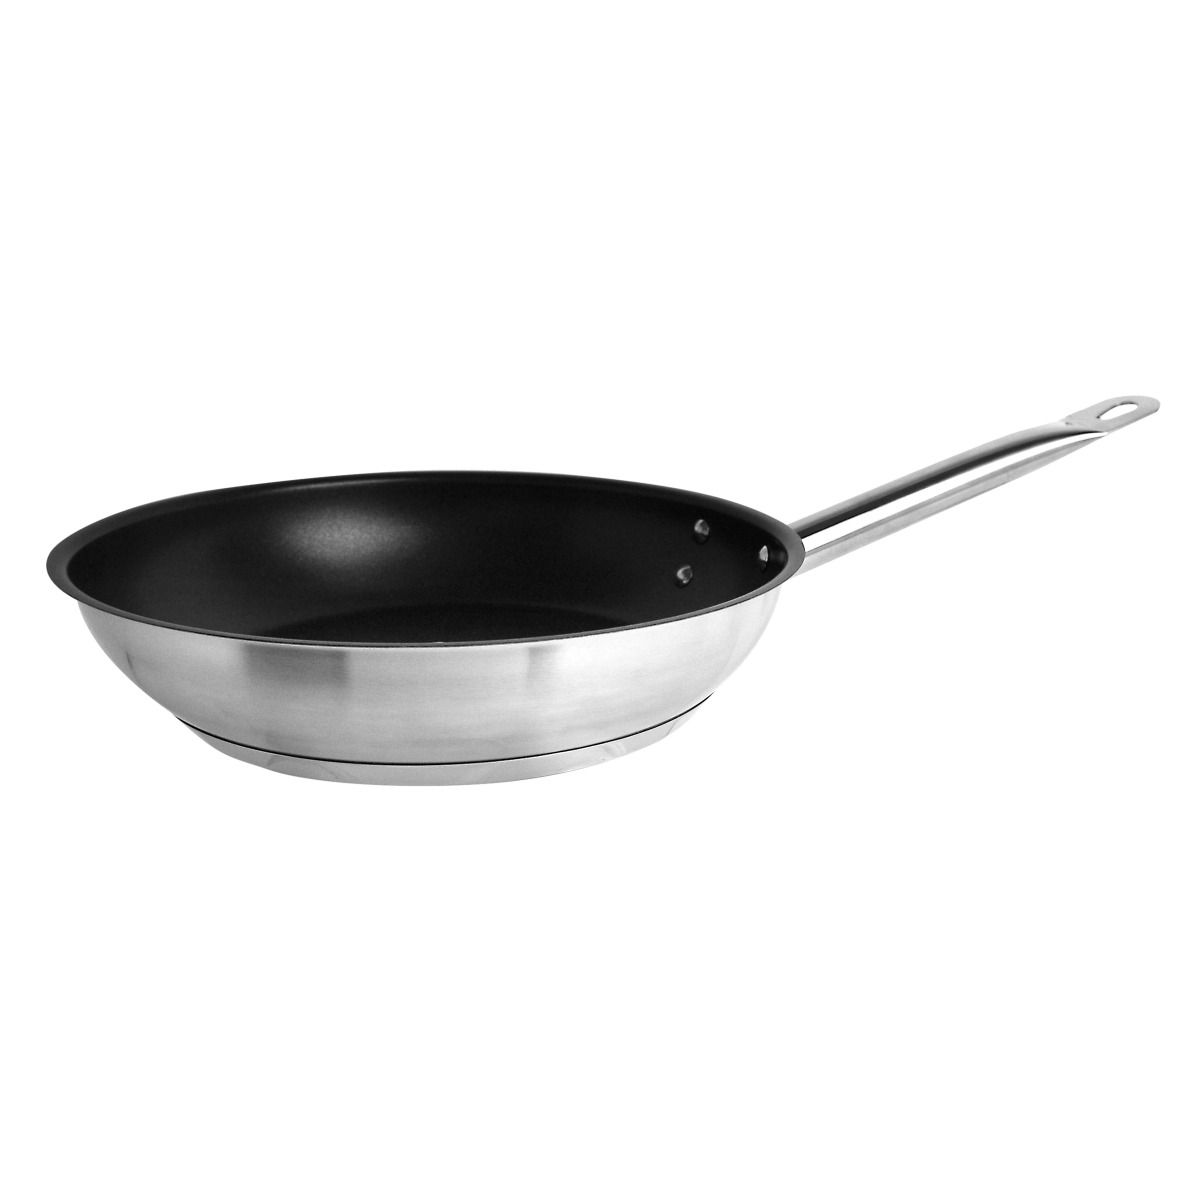 Thunder Group SLSFP4109 9.5" Quantum II Round Stainless Steel Fry Pan